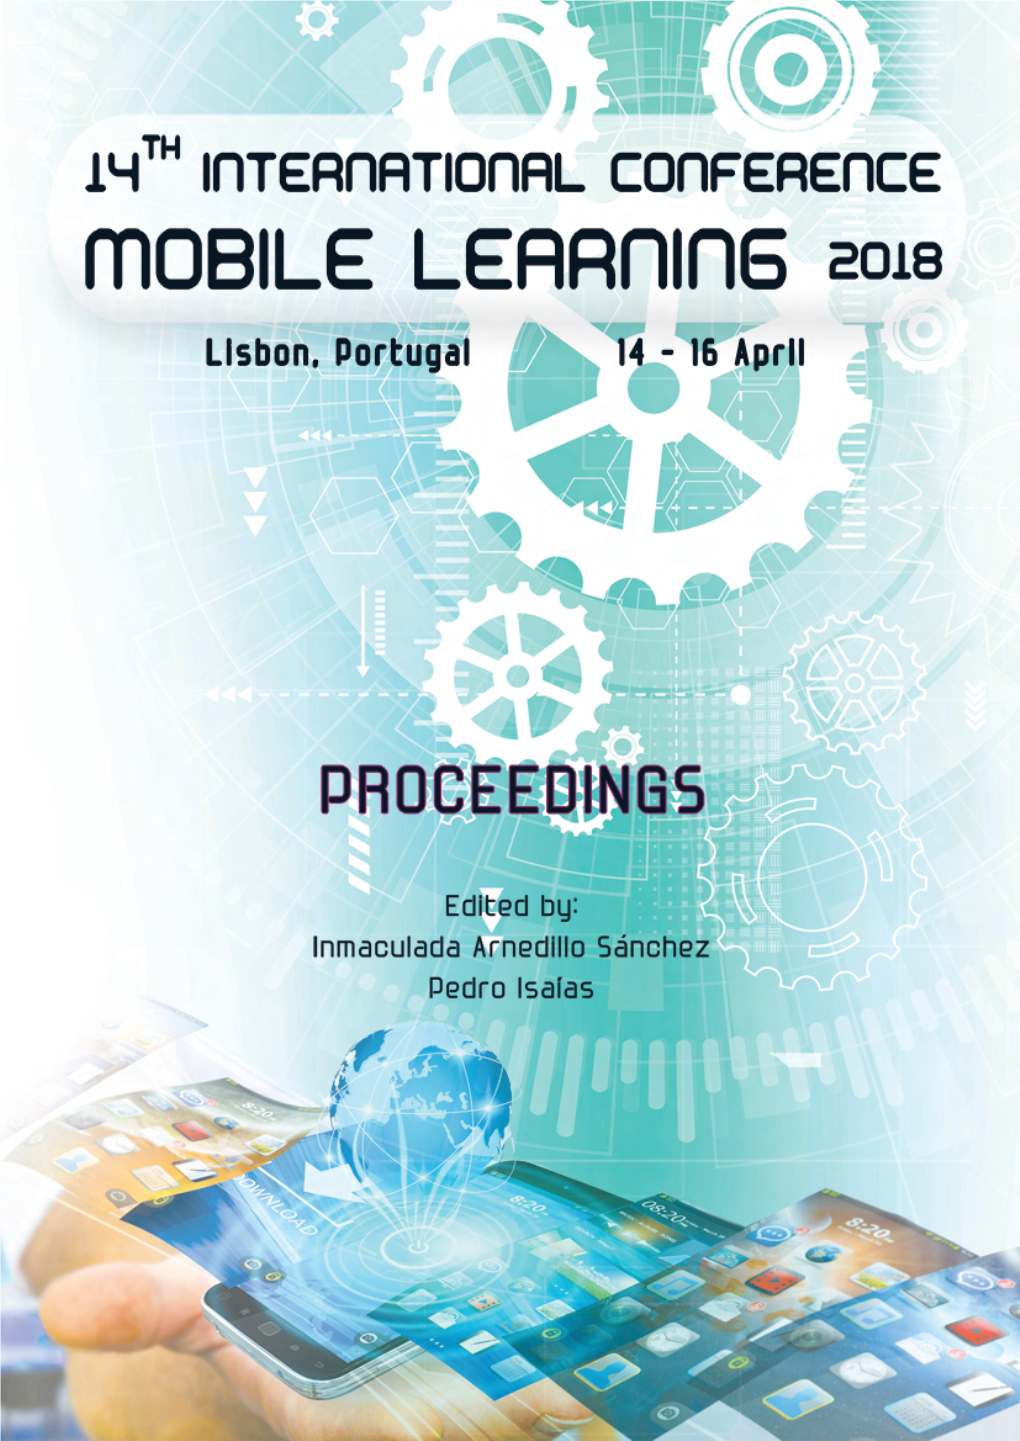 Mobile Learning 2018